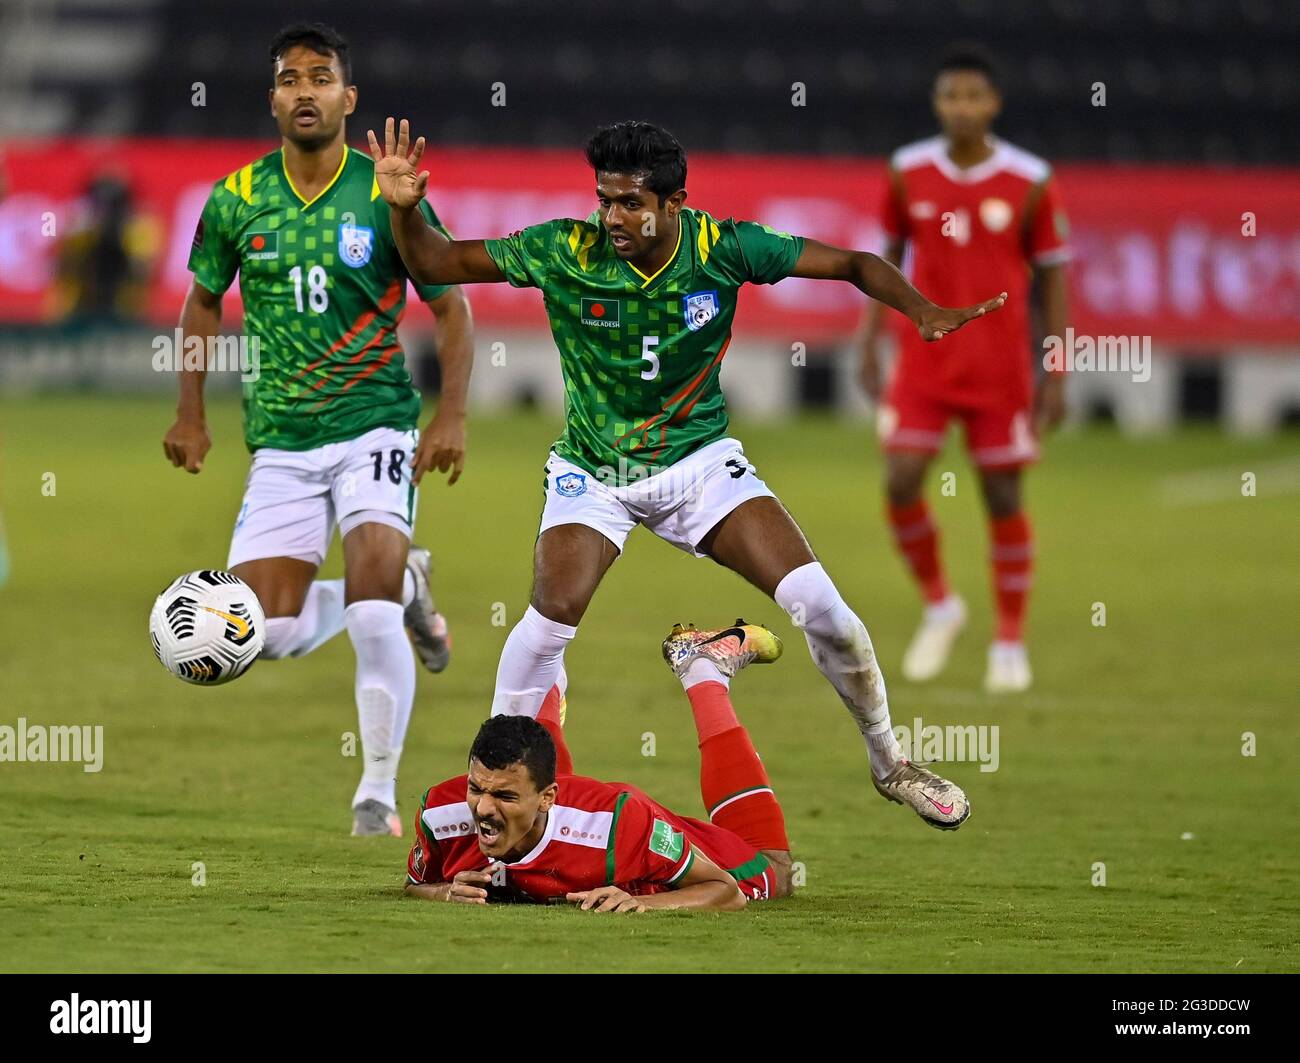 Doha, Qatar. 15th June, 2021. Mohammed Mubarak Al Ghafri (bottom) of Oman vies with Md Rimon Hossain (front R) of Bangladesh during the Group E football match at FIFA World Cup Qatar 2022 and AFC Asian Cup China 2023 Preliminary Joint Qualification in Doha, Qatar, June 15, 2021. Credit: Nikku/Xinhua/Alamy Live News Stock Photo